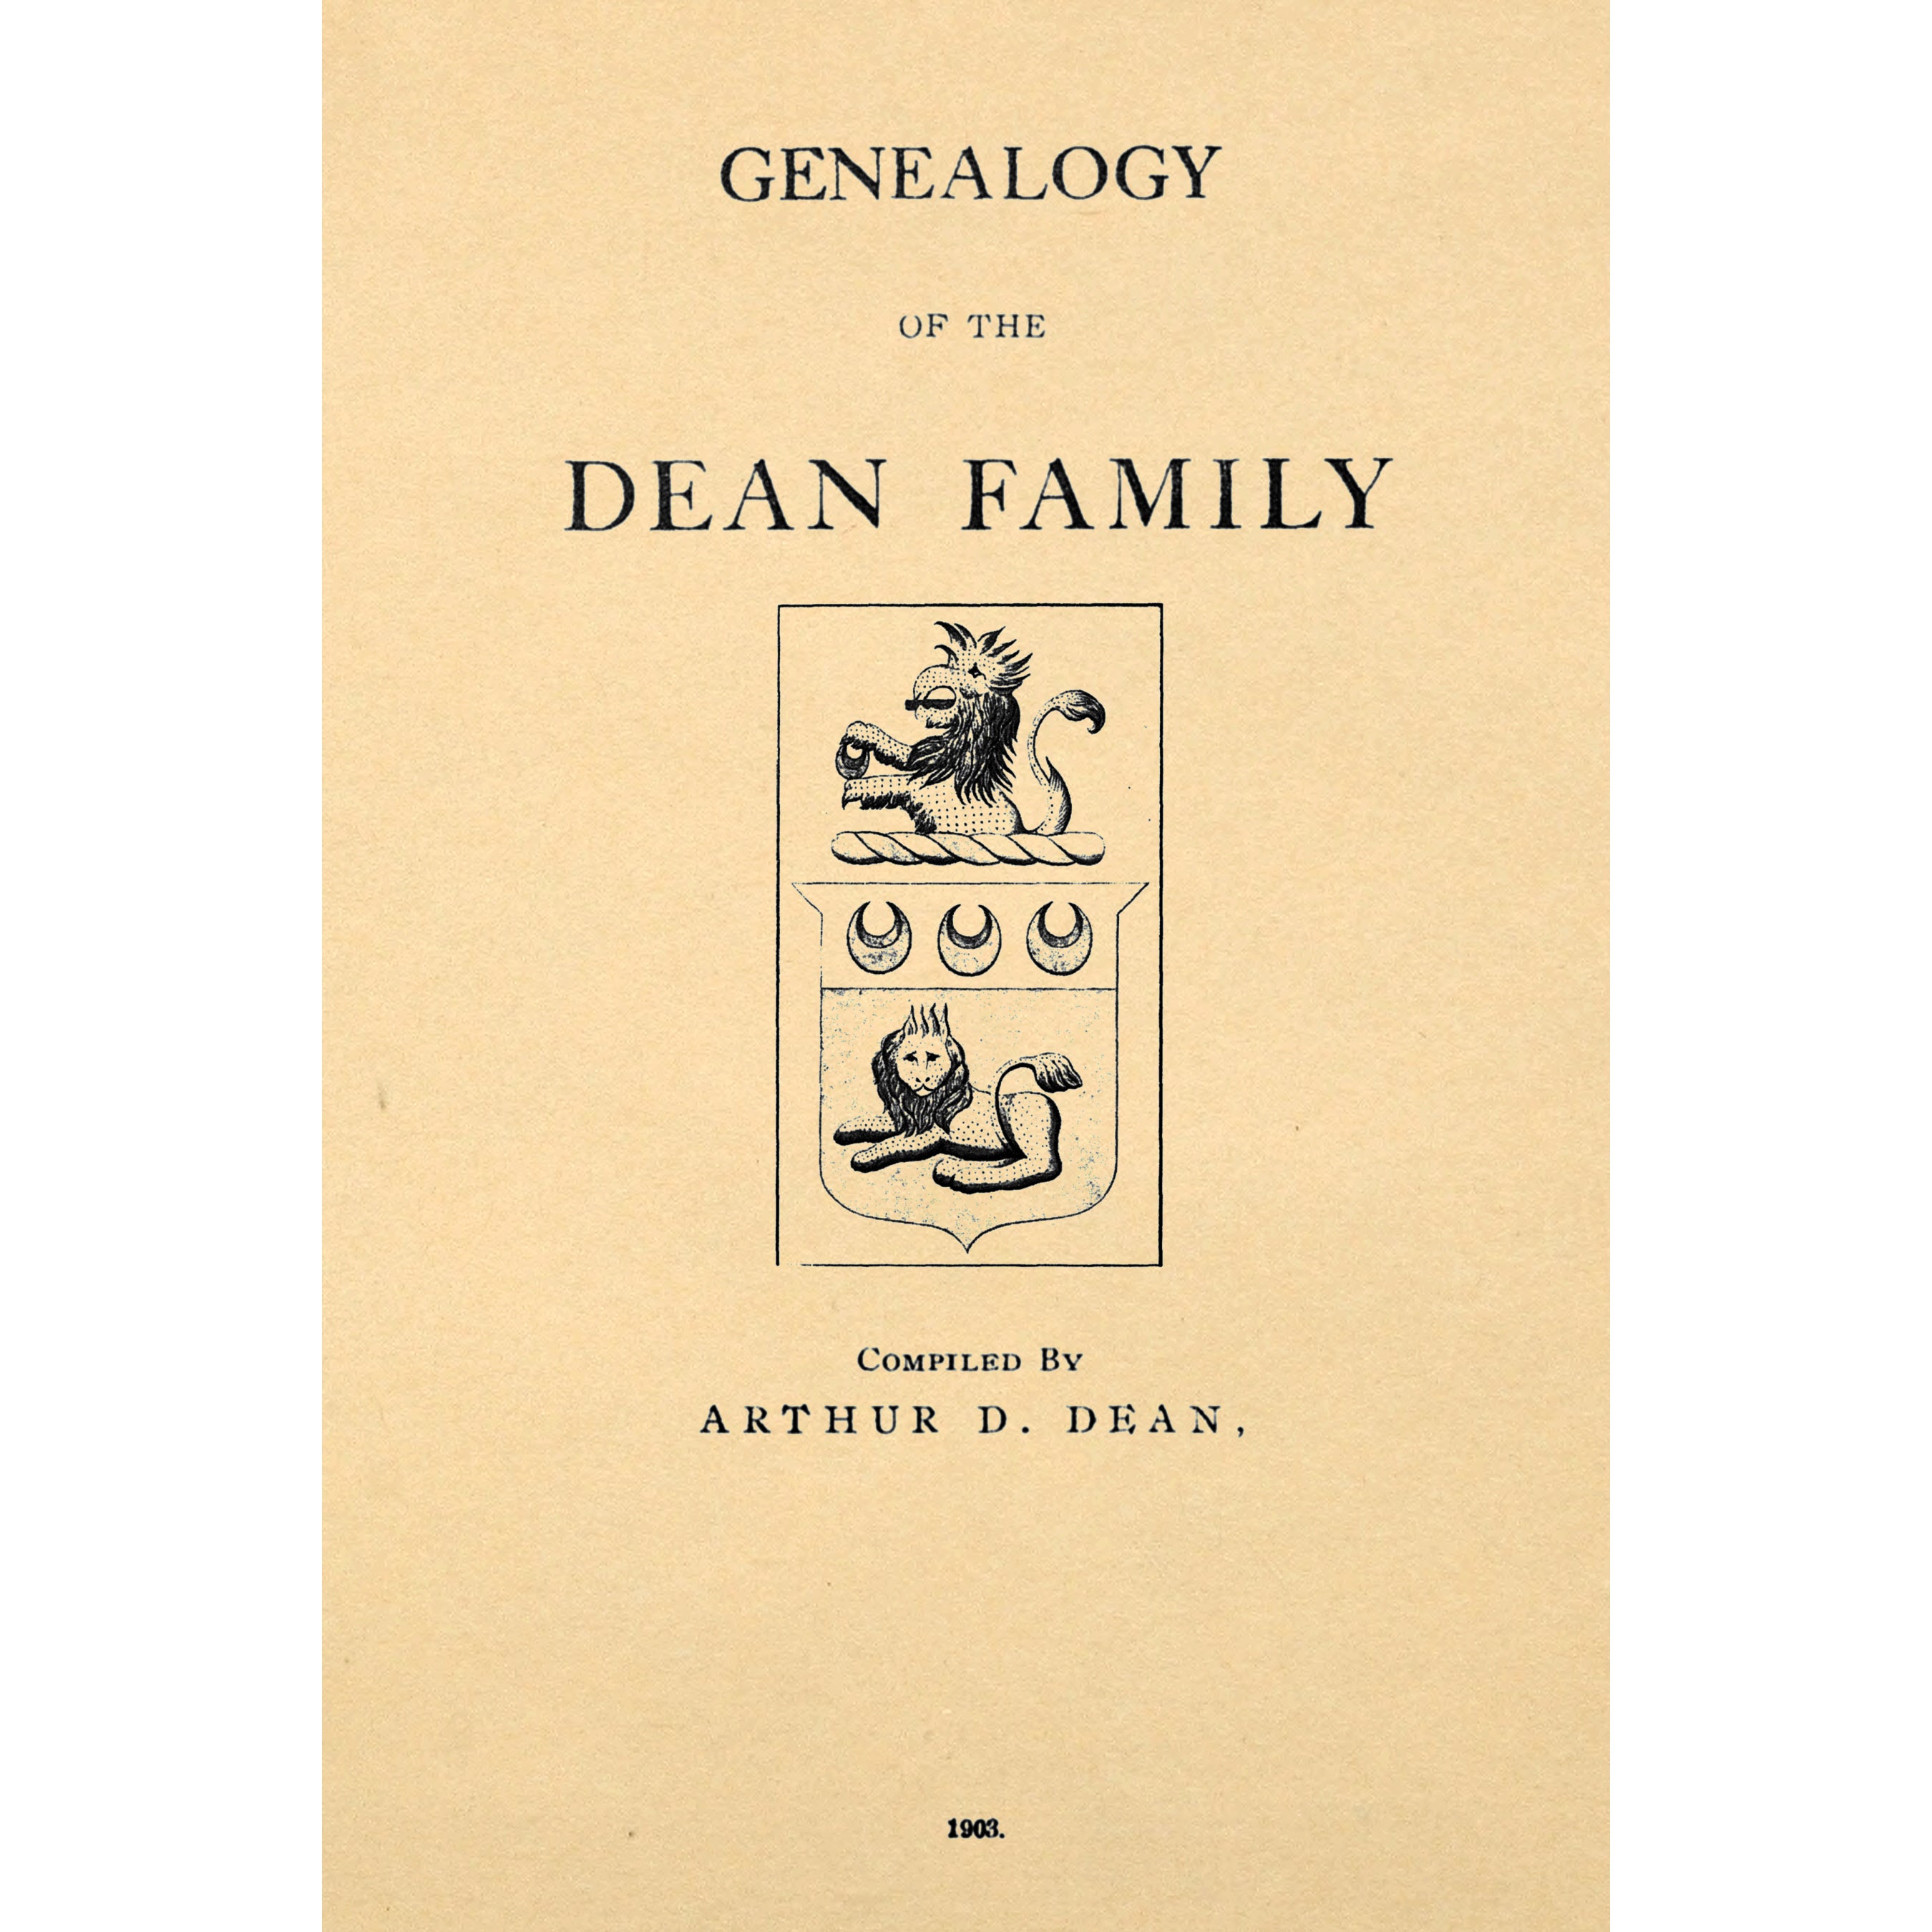 Genealogy of the Dean Family Descended From Ezra Dean, of Plainfield, Conn. and Cranston, R. I.